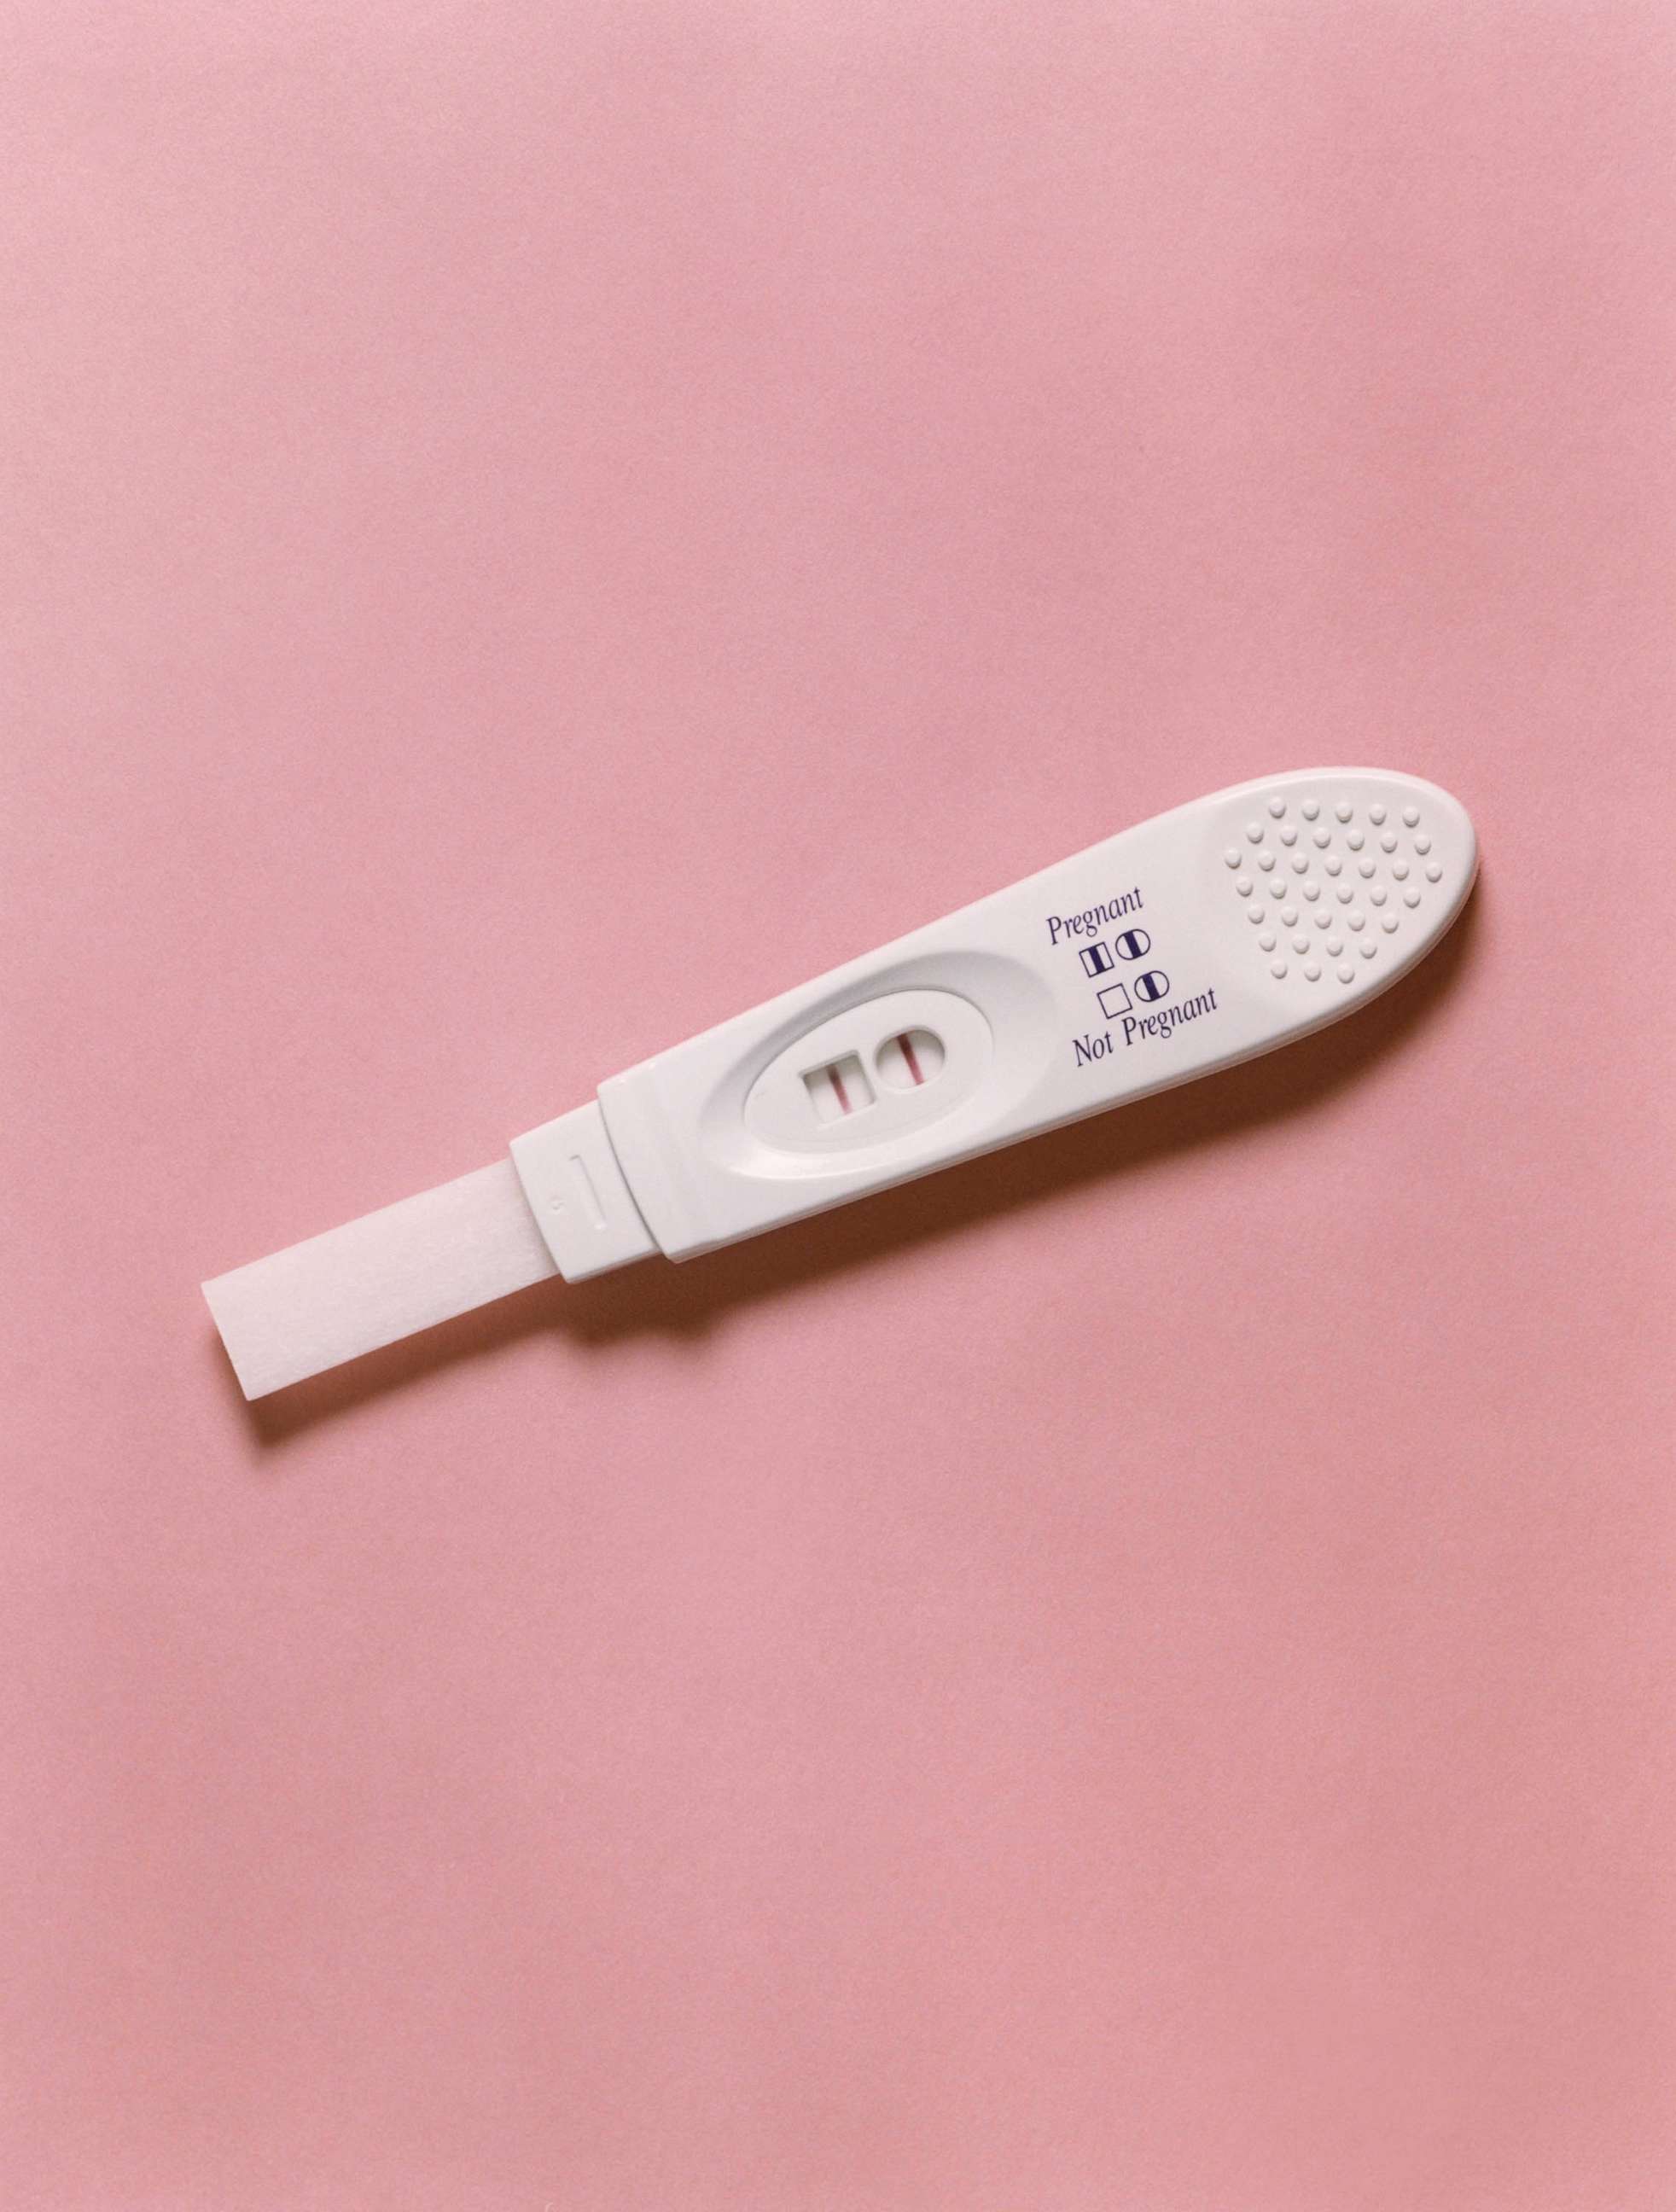 PHOTO: A pregnancy test is seen in this undated stock photo.